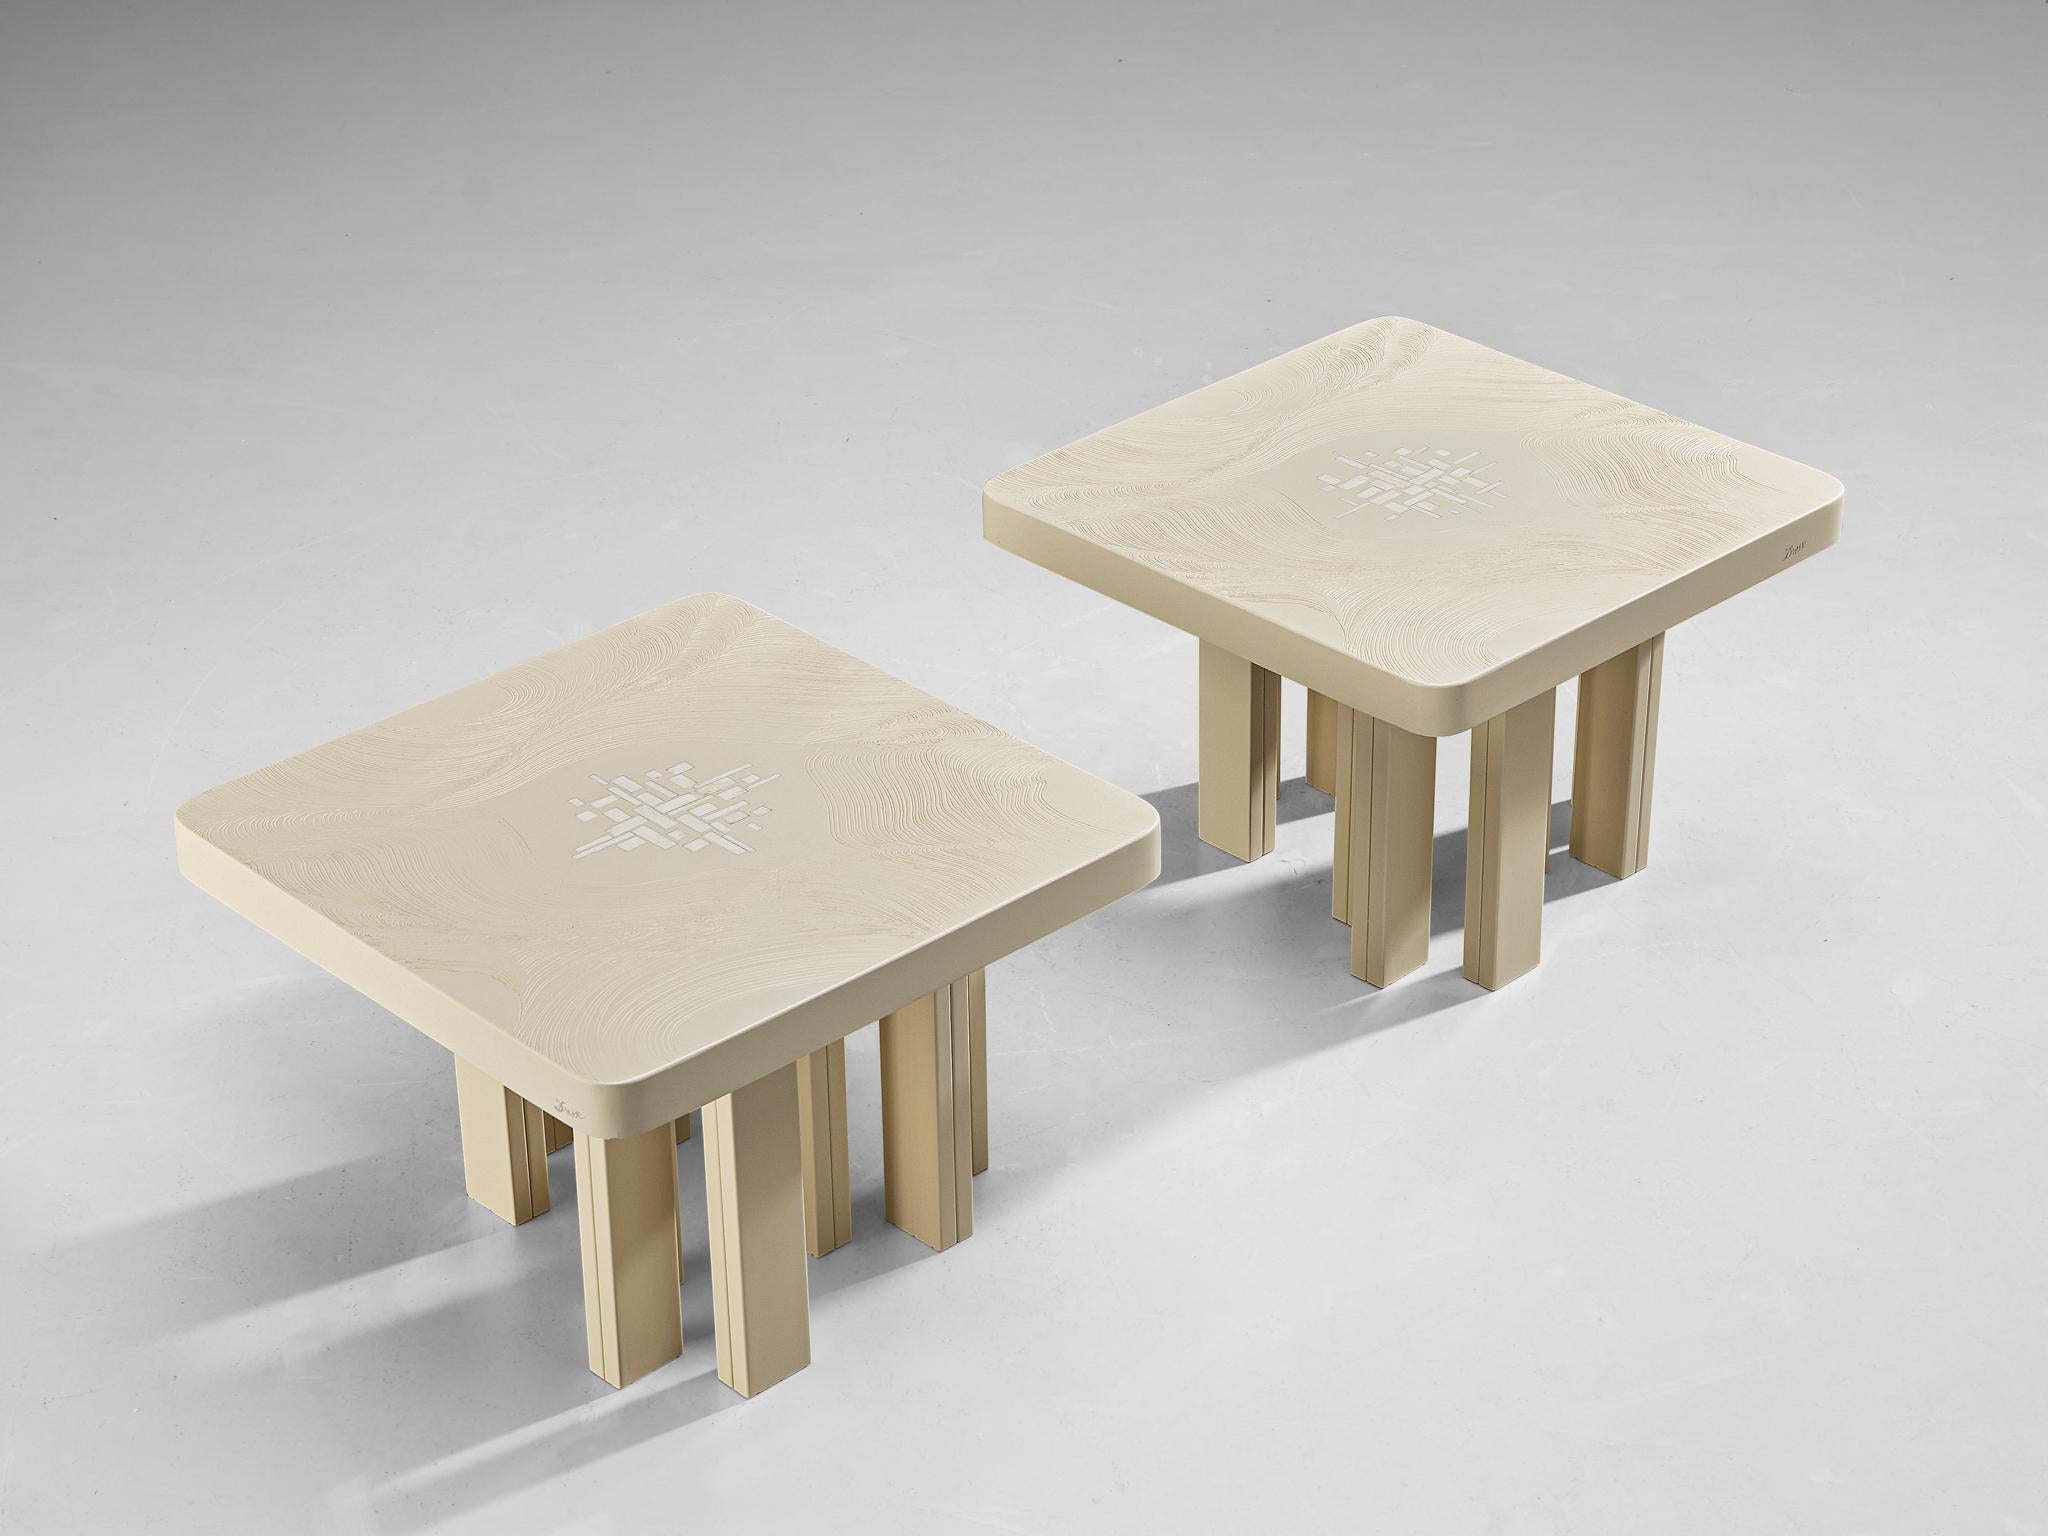 Jean Claude Dresse, pair of coffee tables, resin, bone, lacquered steel, circa 1970

This eccentric coffee table is a design by the hand of Belgian designer Jean Claude Dresse. Observing the piece now, every inch truly showcases the magnificent